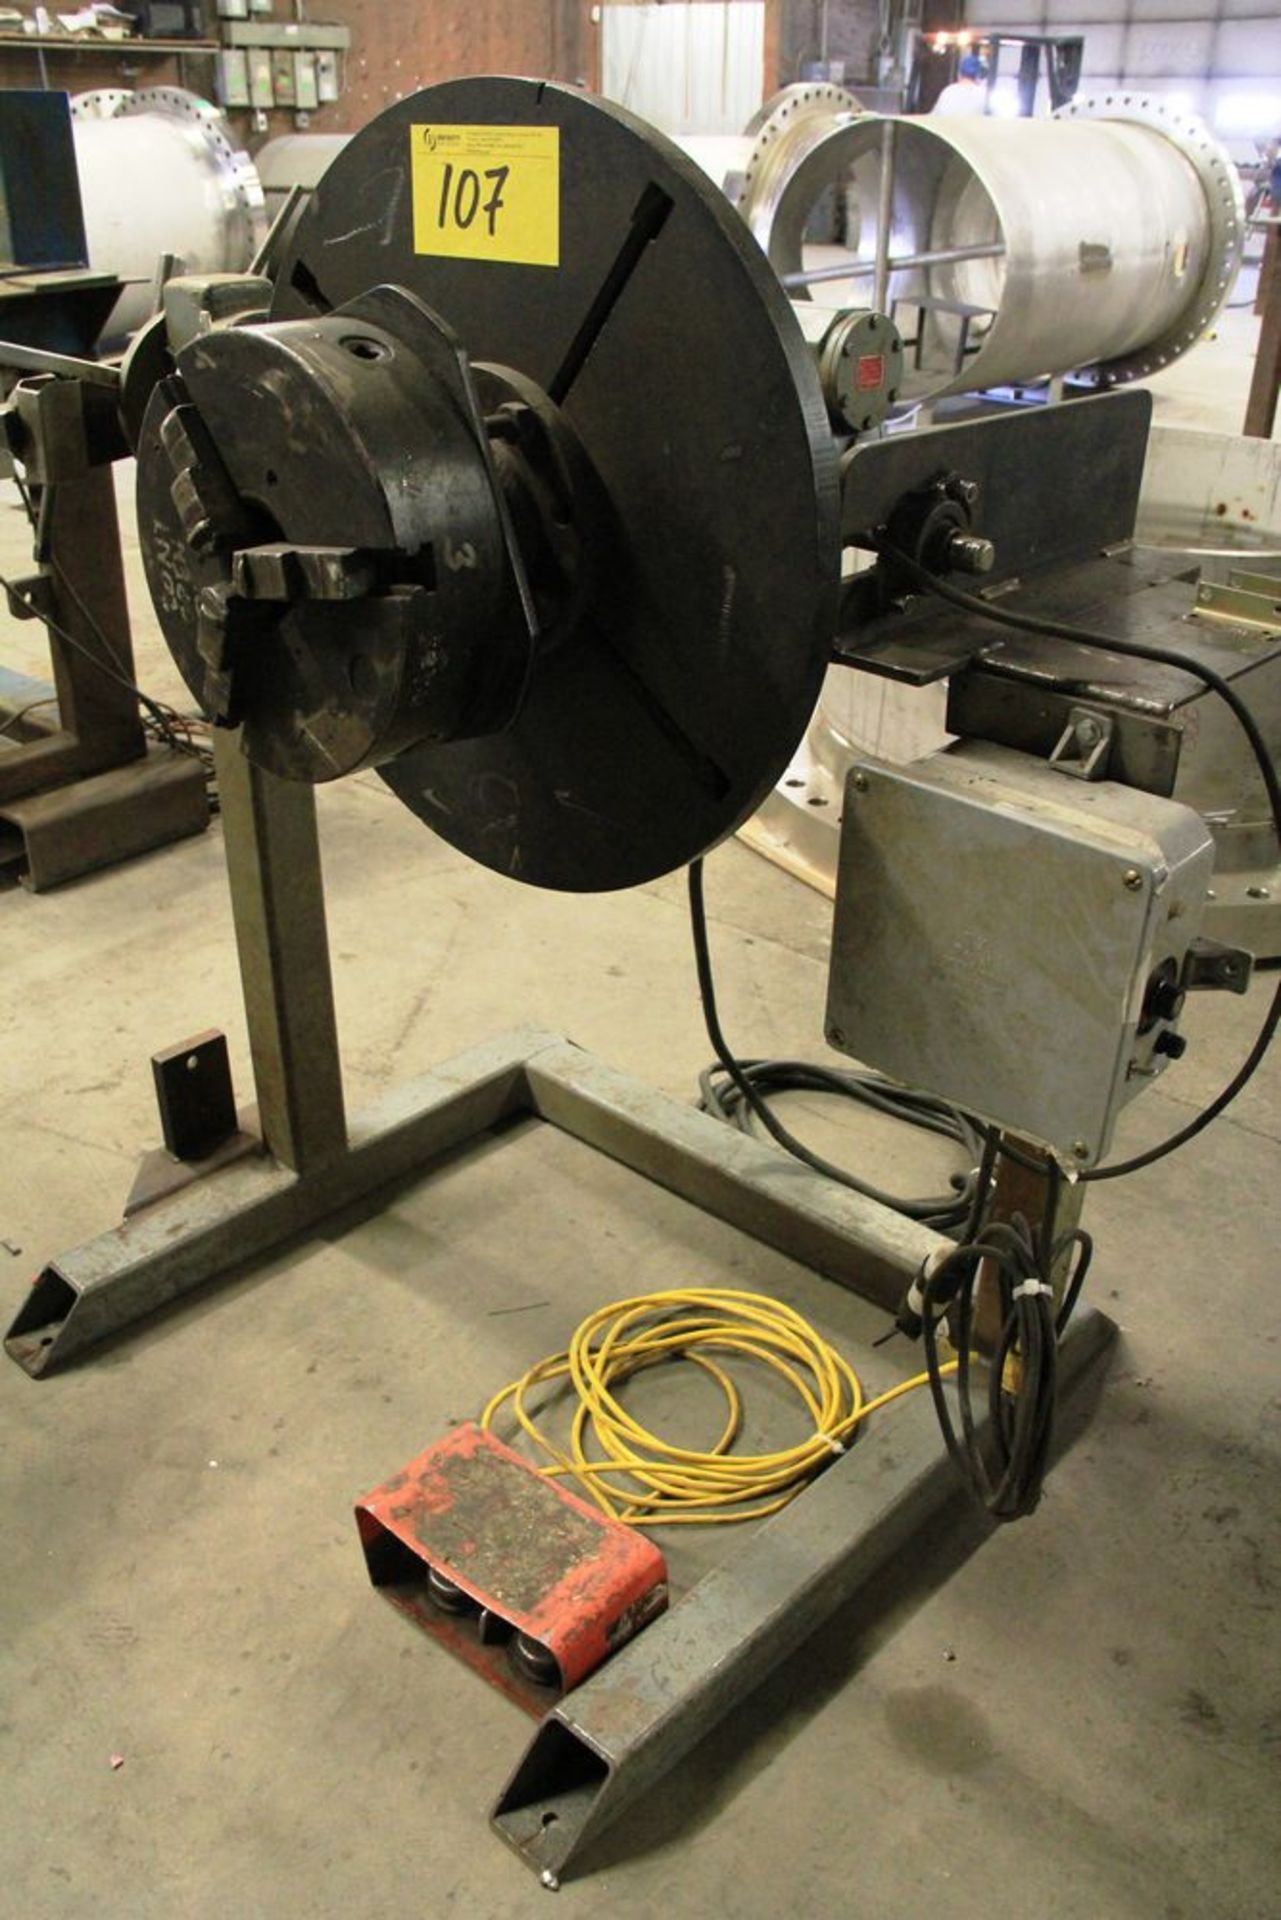 IRCO 2-2526 WELDING POSITIONER, 24" FACE PLATE, 3 JAW CHUCK, FOOT CONTROLLER, 1 PHASE, 110 AMP,